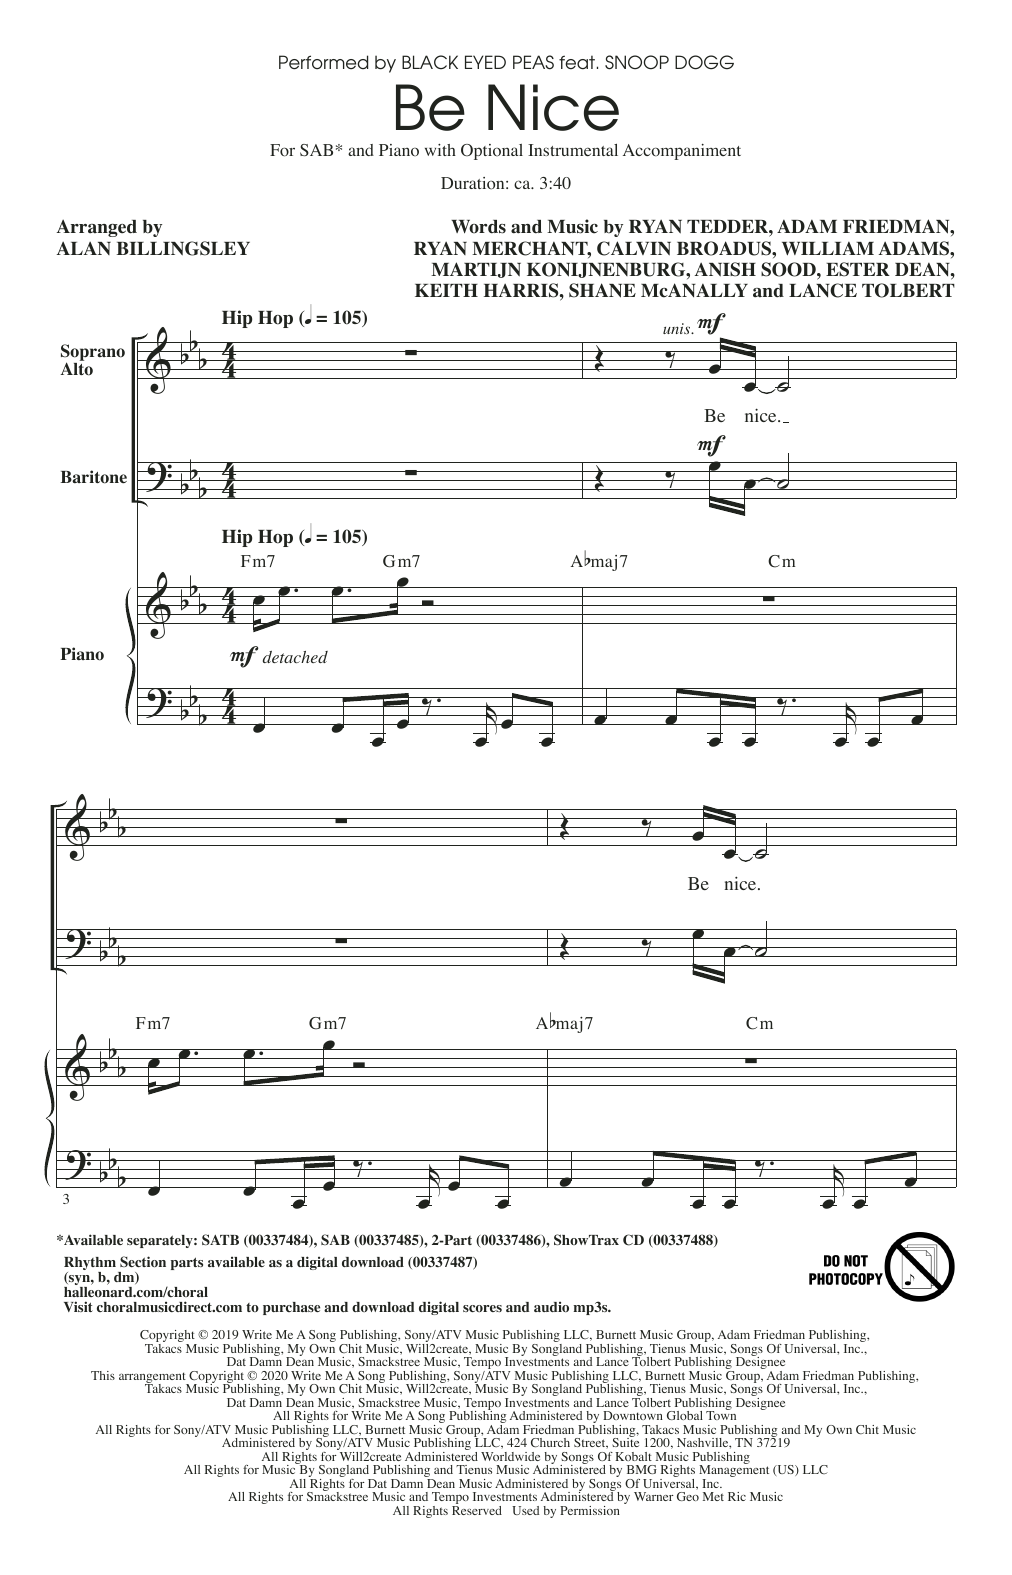 Download Black Eyed Peas Be Nice (feat. Snoop Dogg) (arr. Alan Billingsley) sheet music and printable PDF score & Concert music notes